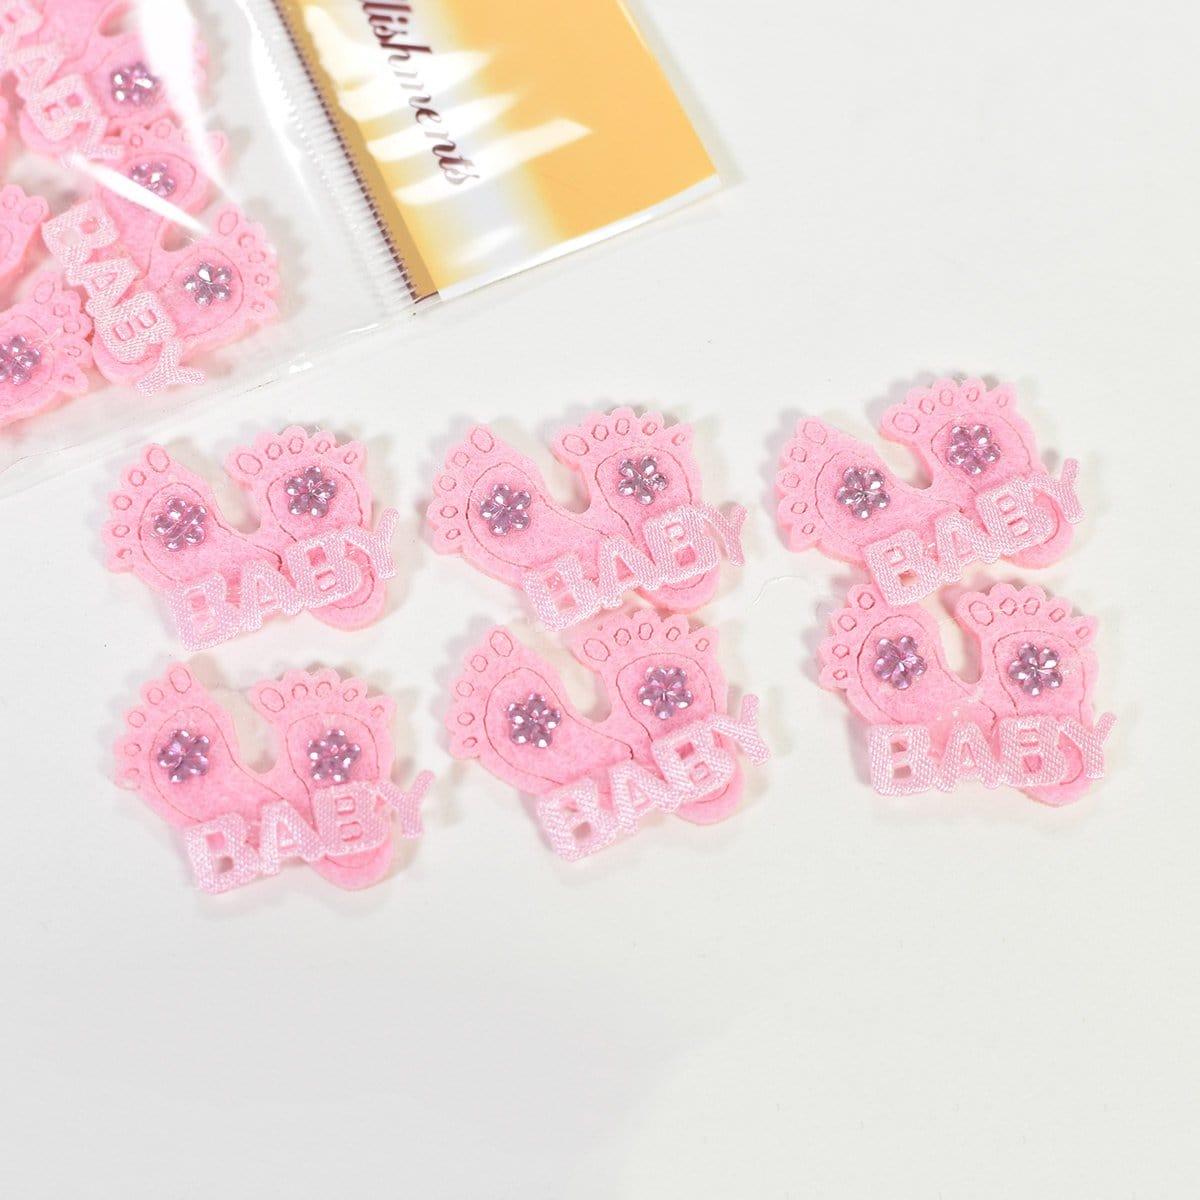 Buy Baby Shower Pink felt baby feet embellishments, 6 per package sold at Party Expert